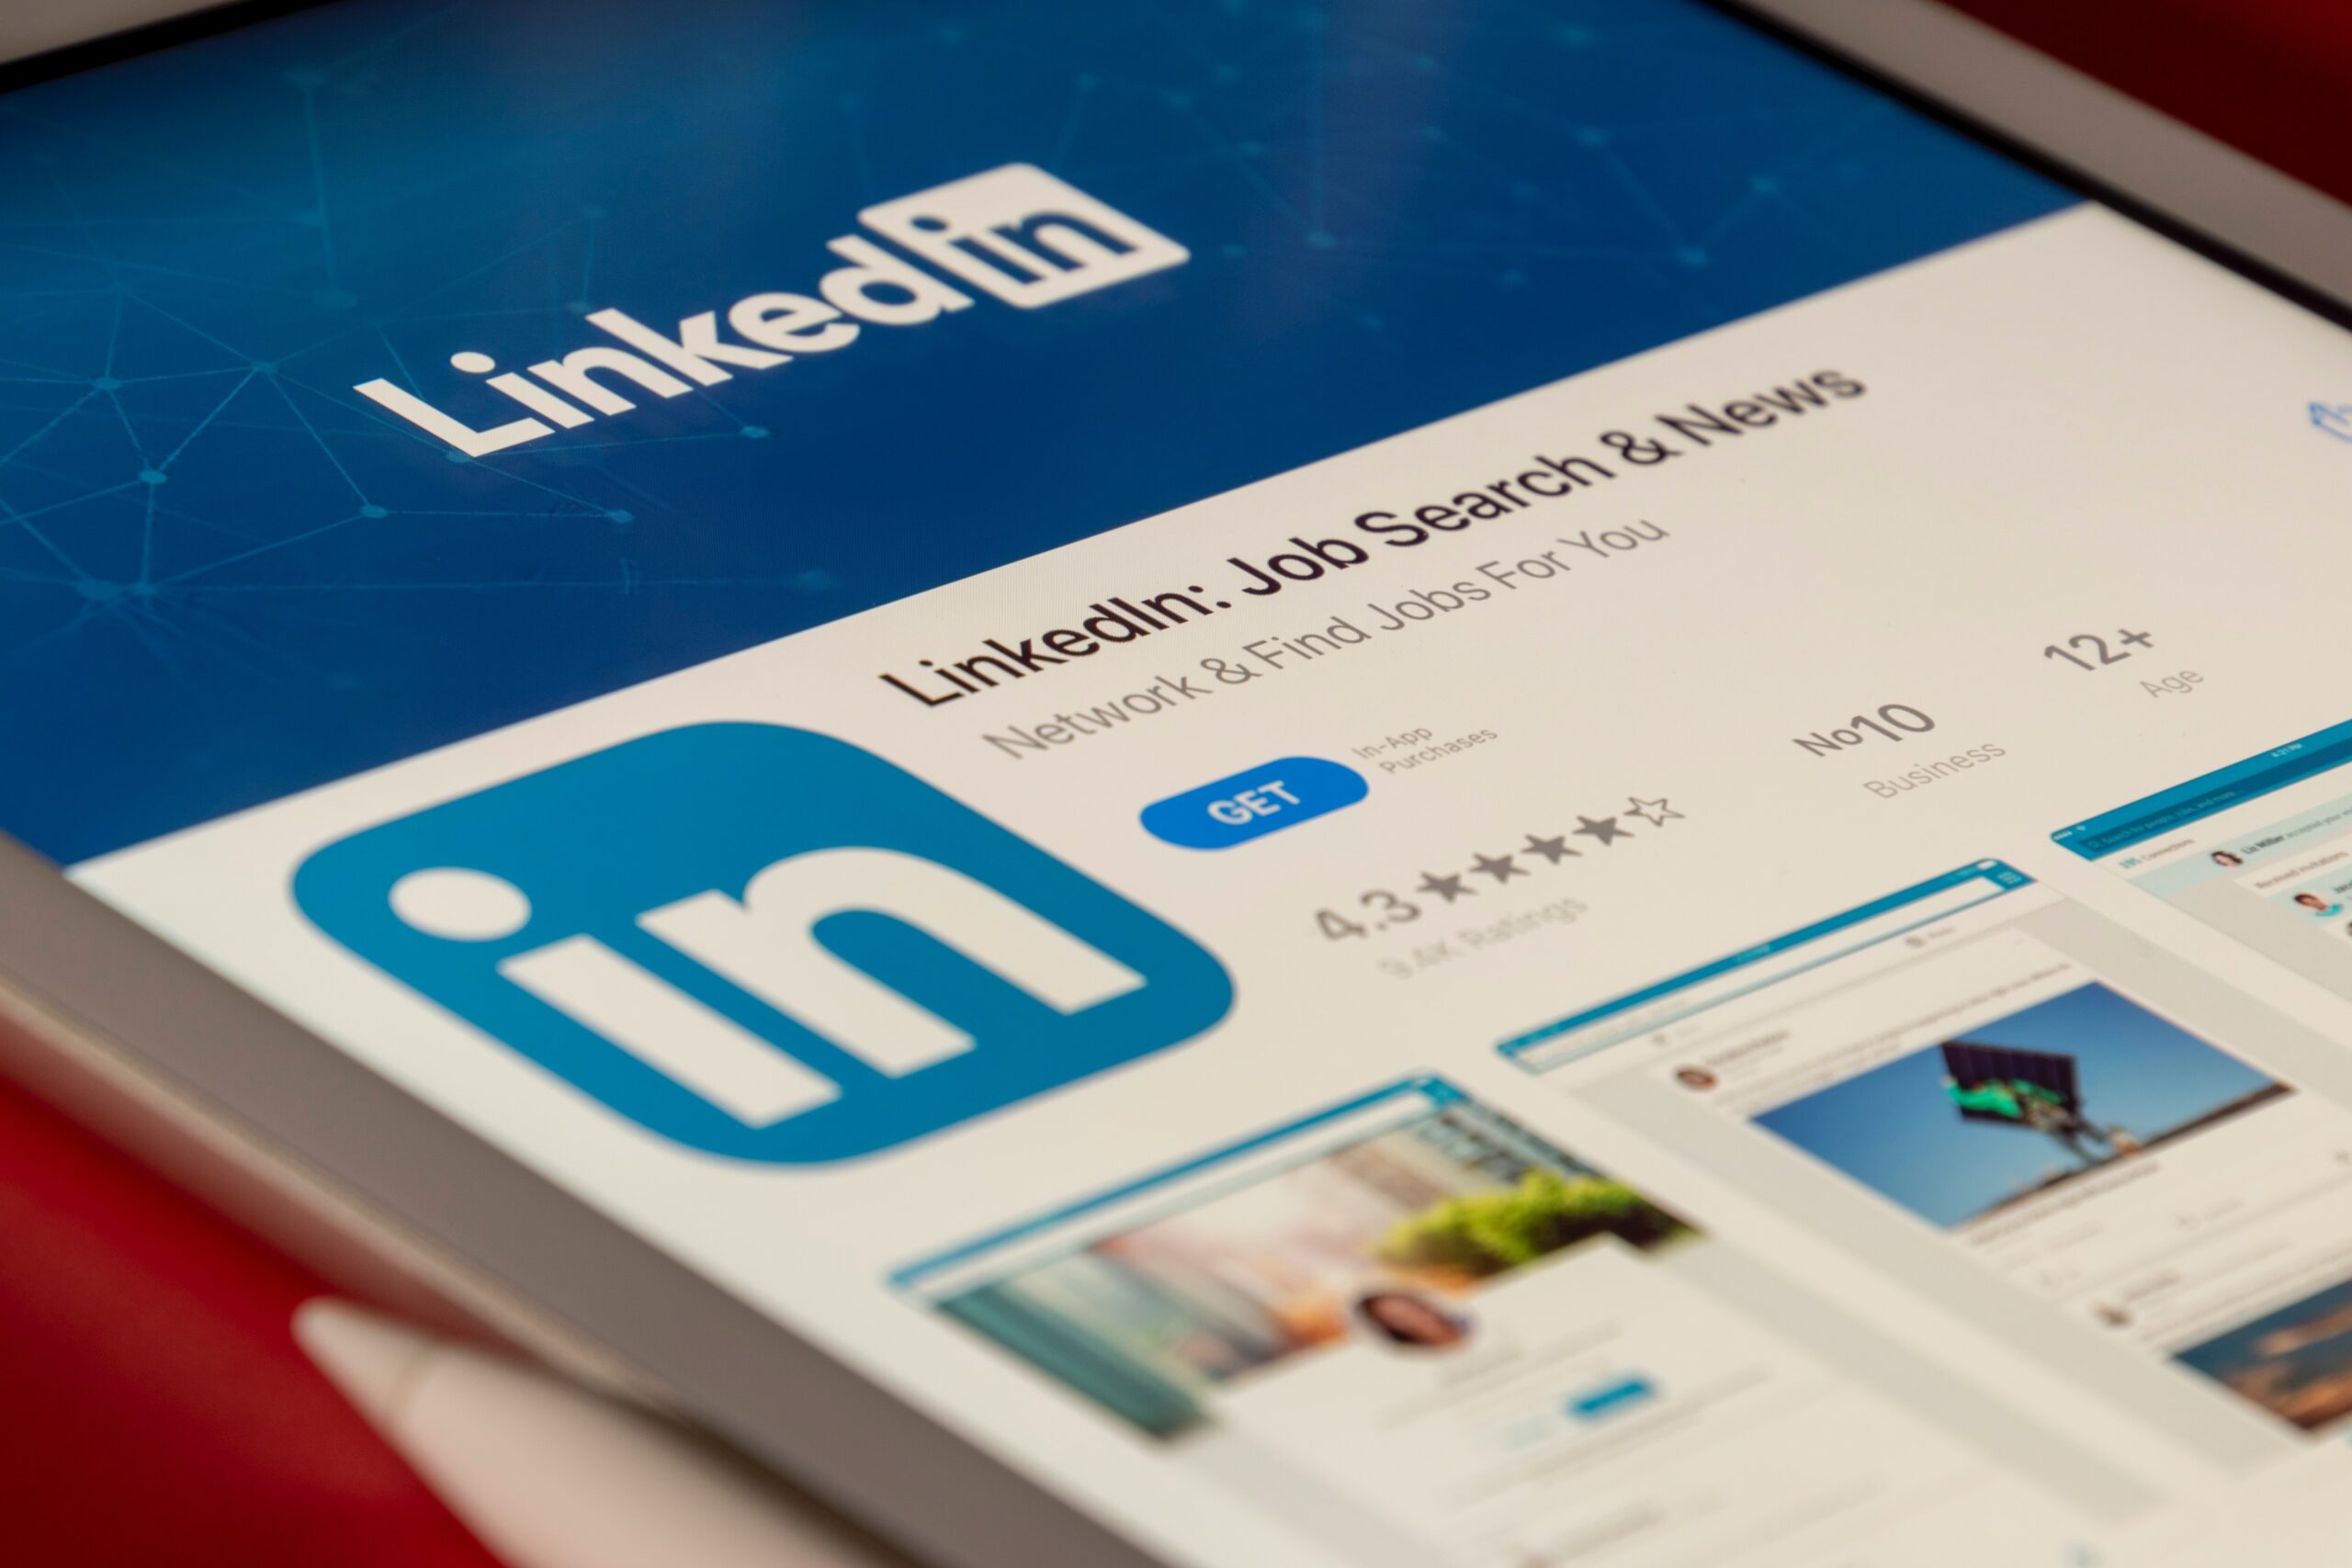 What should I post on LinkedIn? Our full-proof LinkedIn content strategy for executives